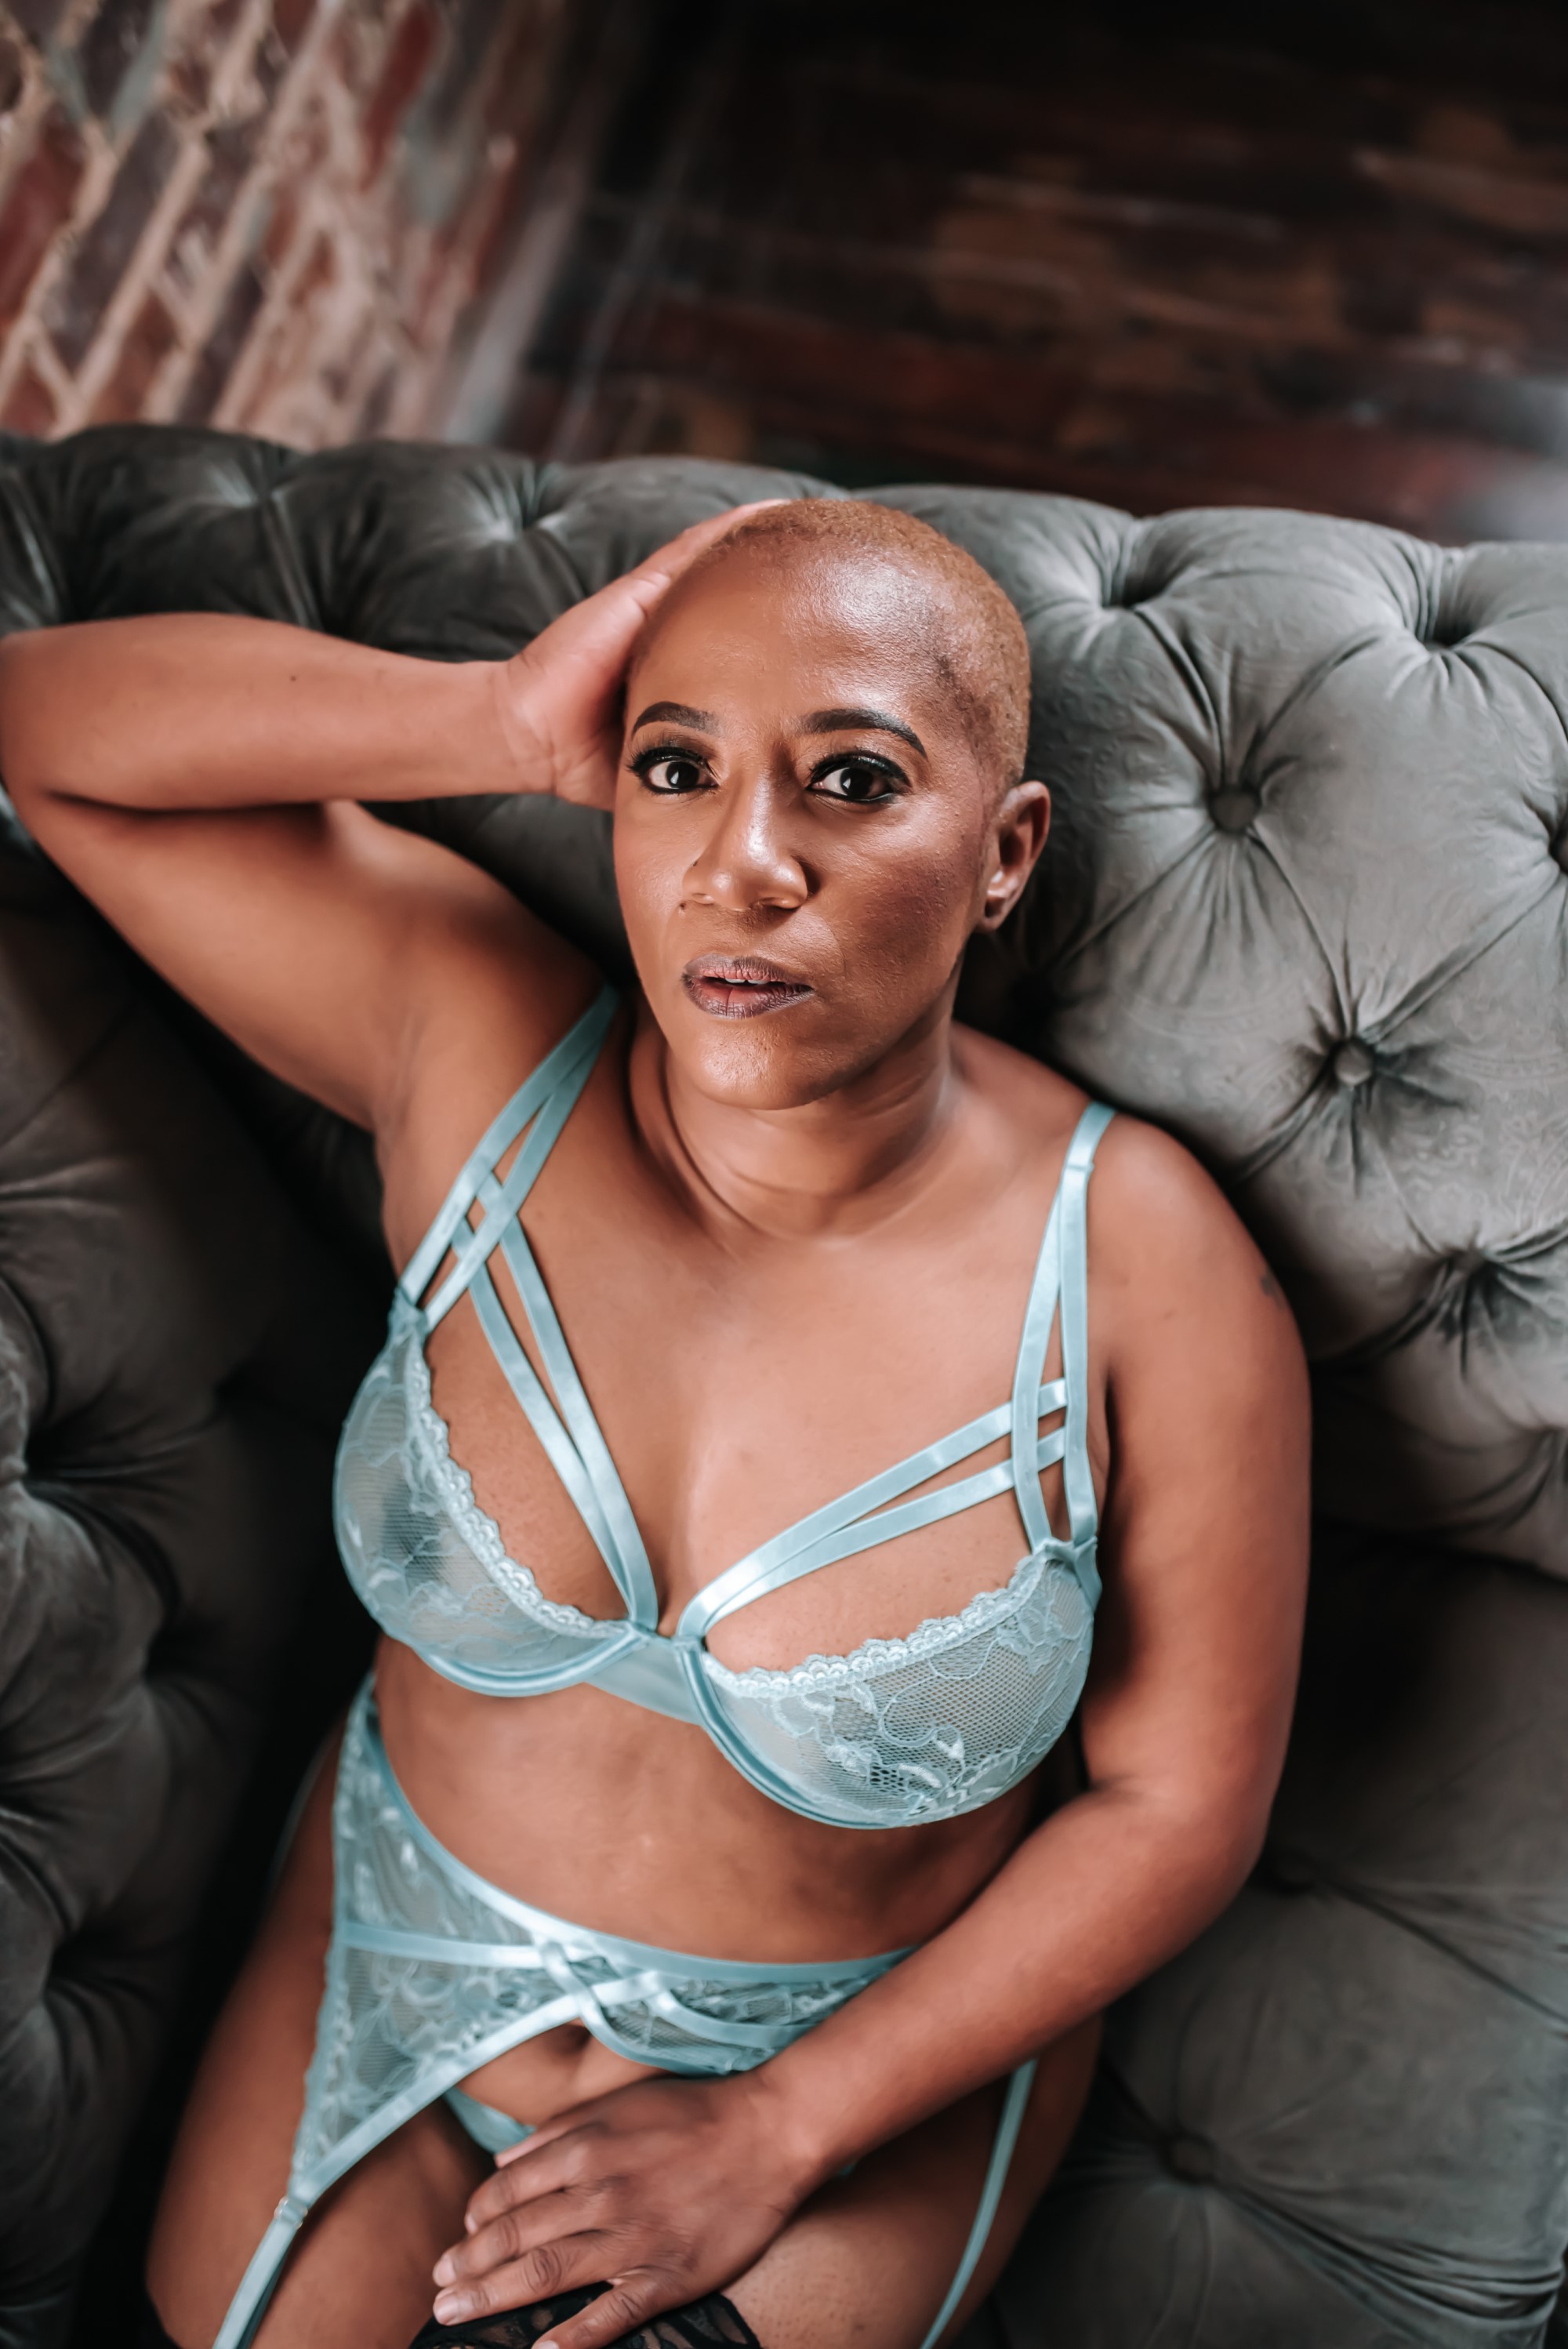 woman wearing light blue, see-through lingerie and lounging on grey couch